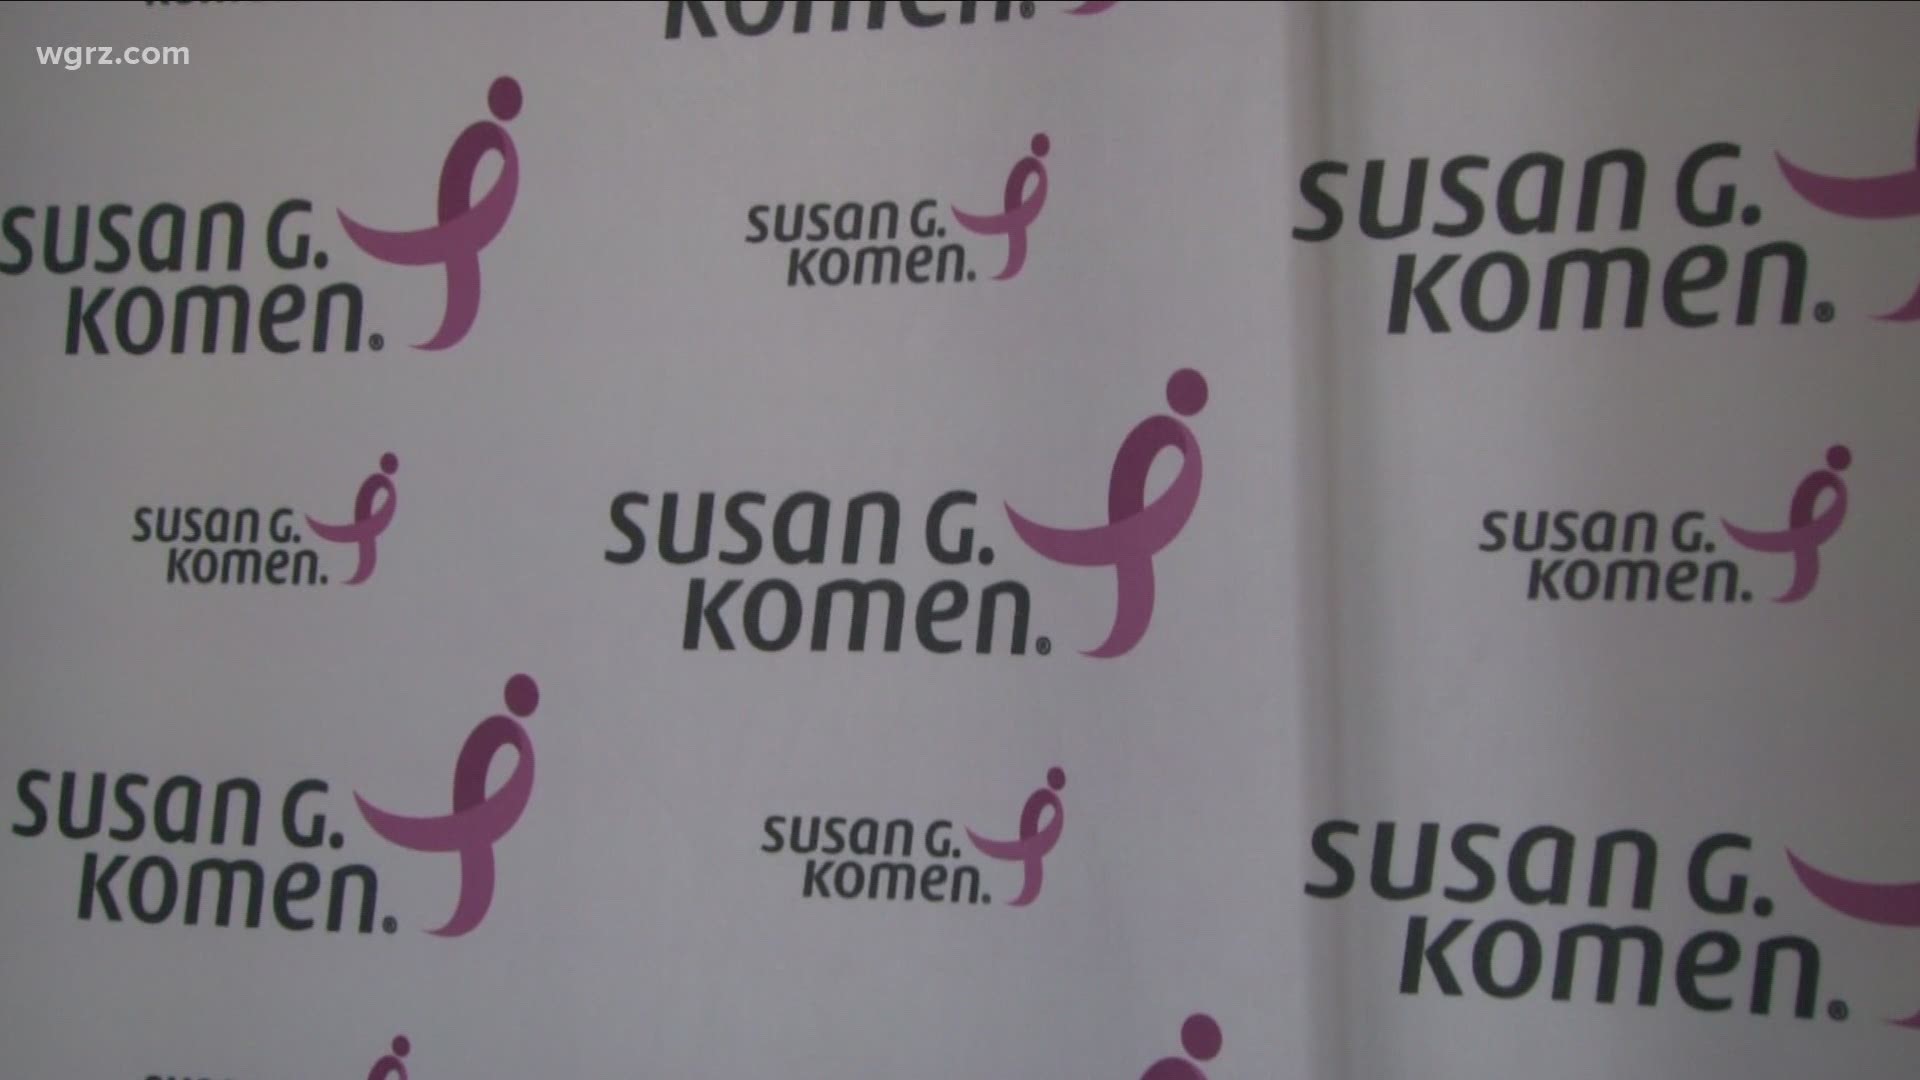 On Sunday, September 13, 2020 more than 2,200 participants will walk and race virtually on their own courses to support those affected by breast cancer in their comm